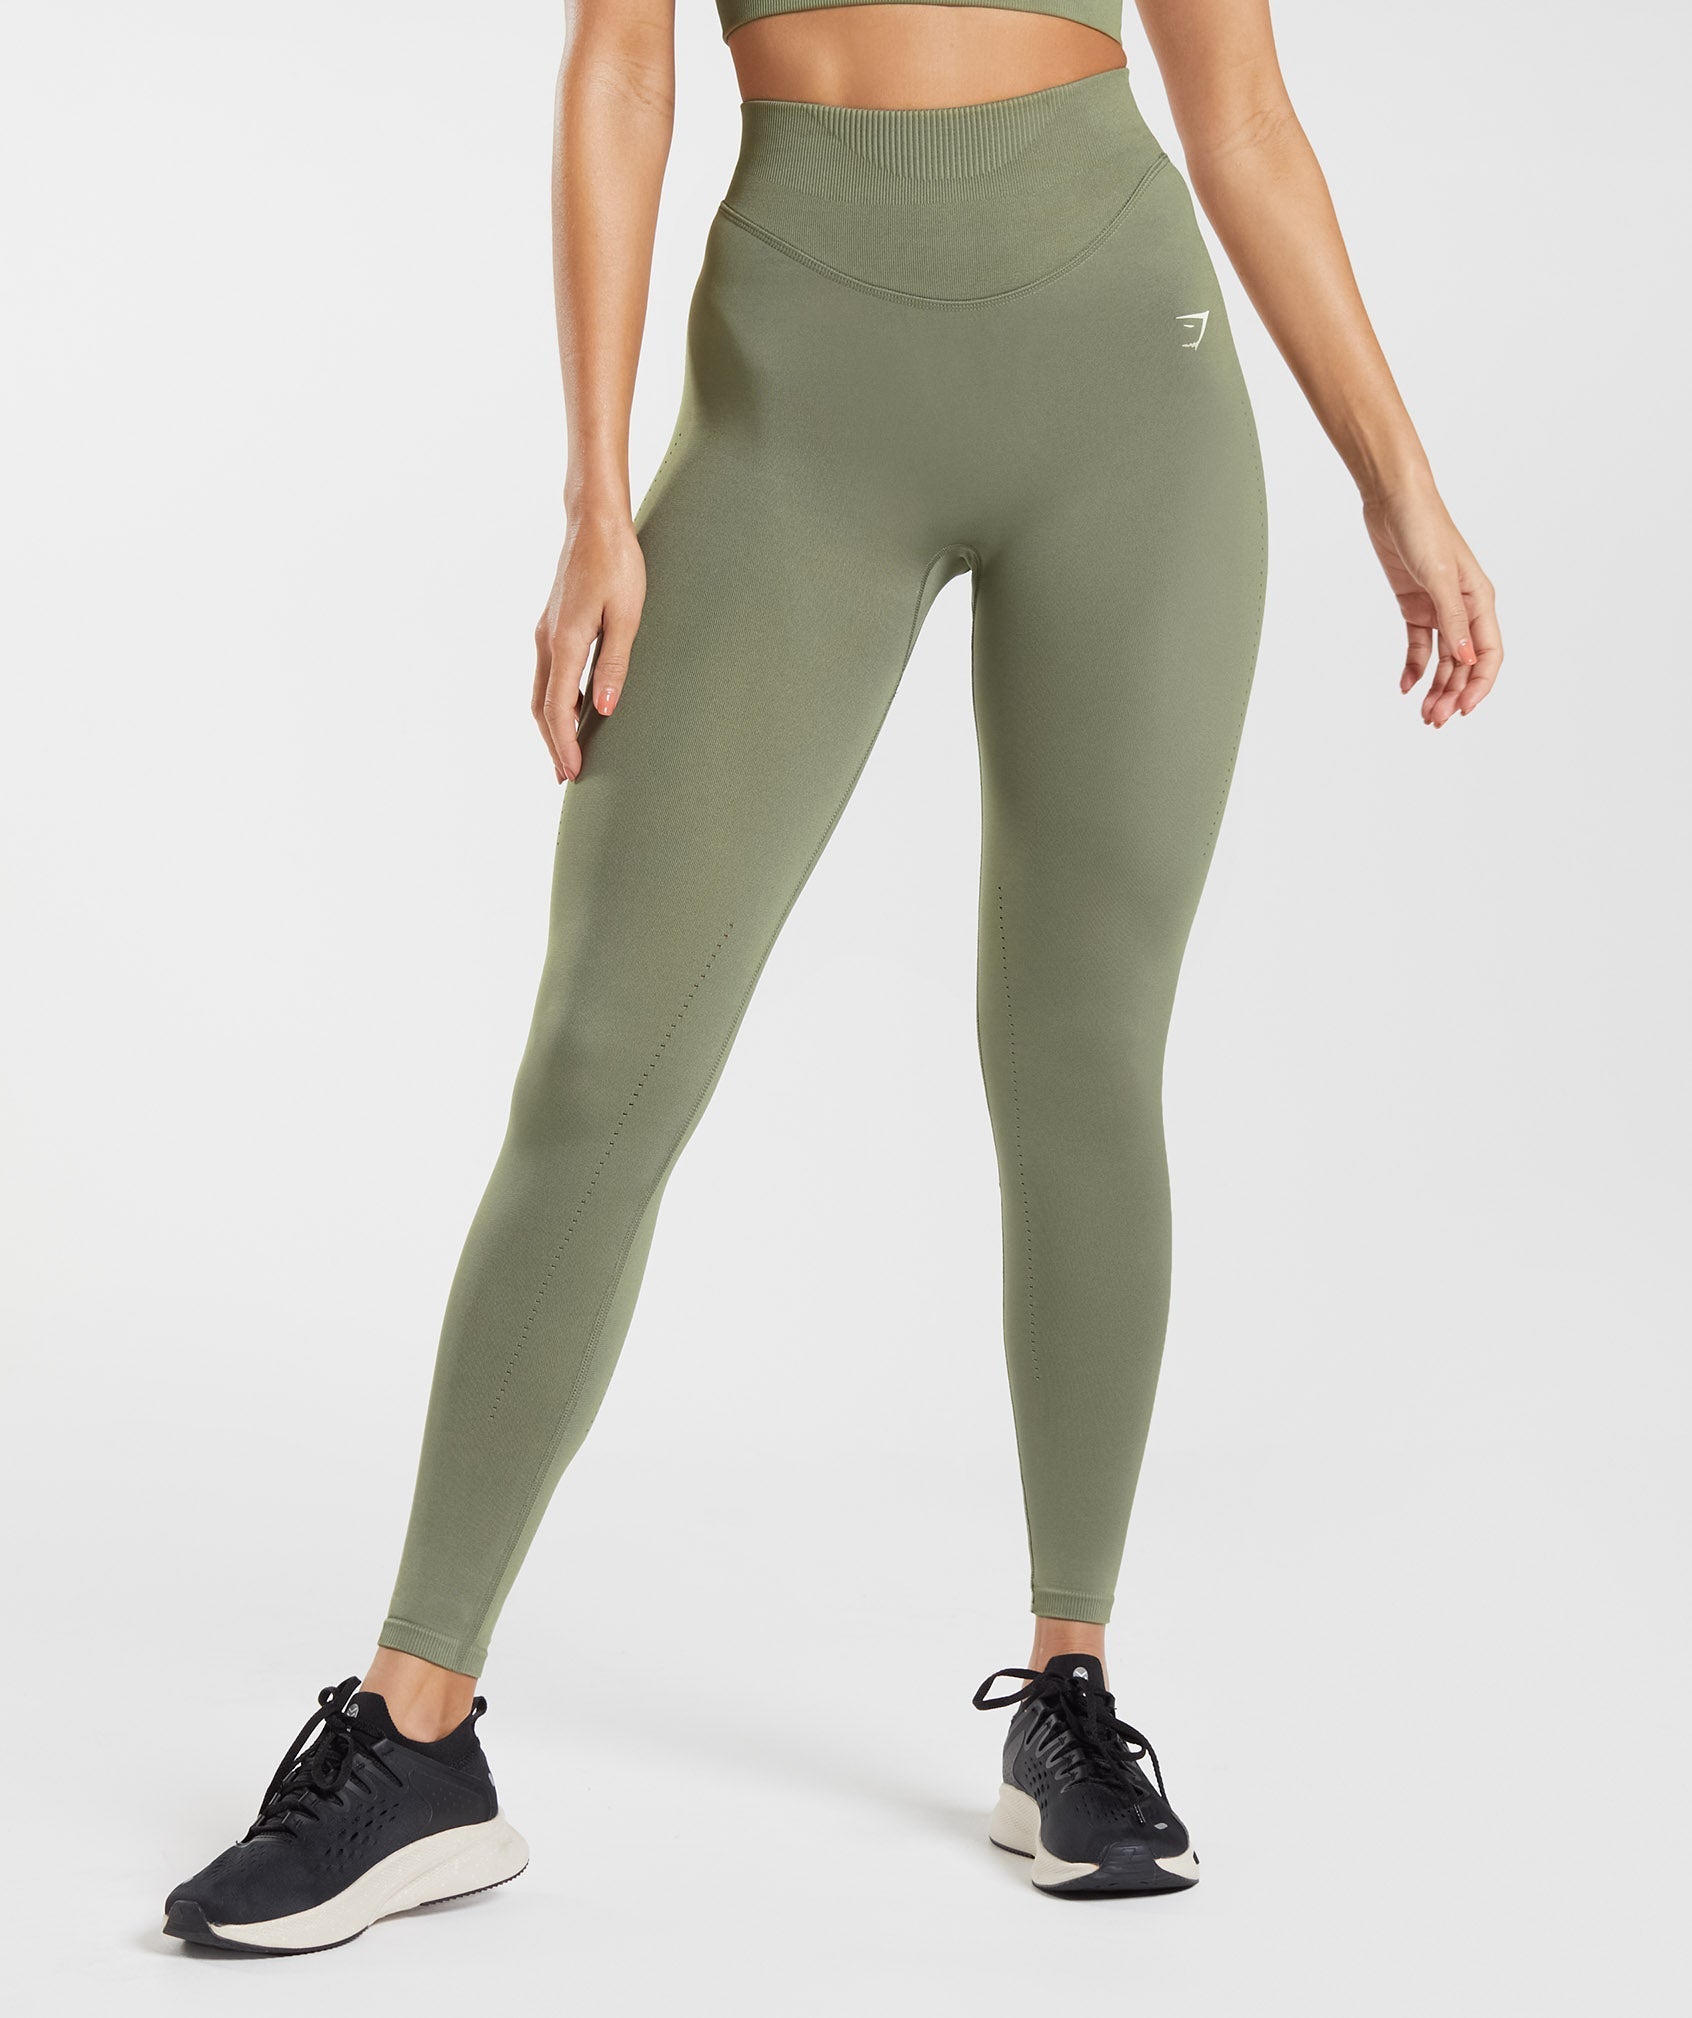 Sweat Seamless Leggings in Dusty Olive - view 1